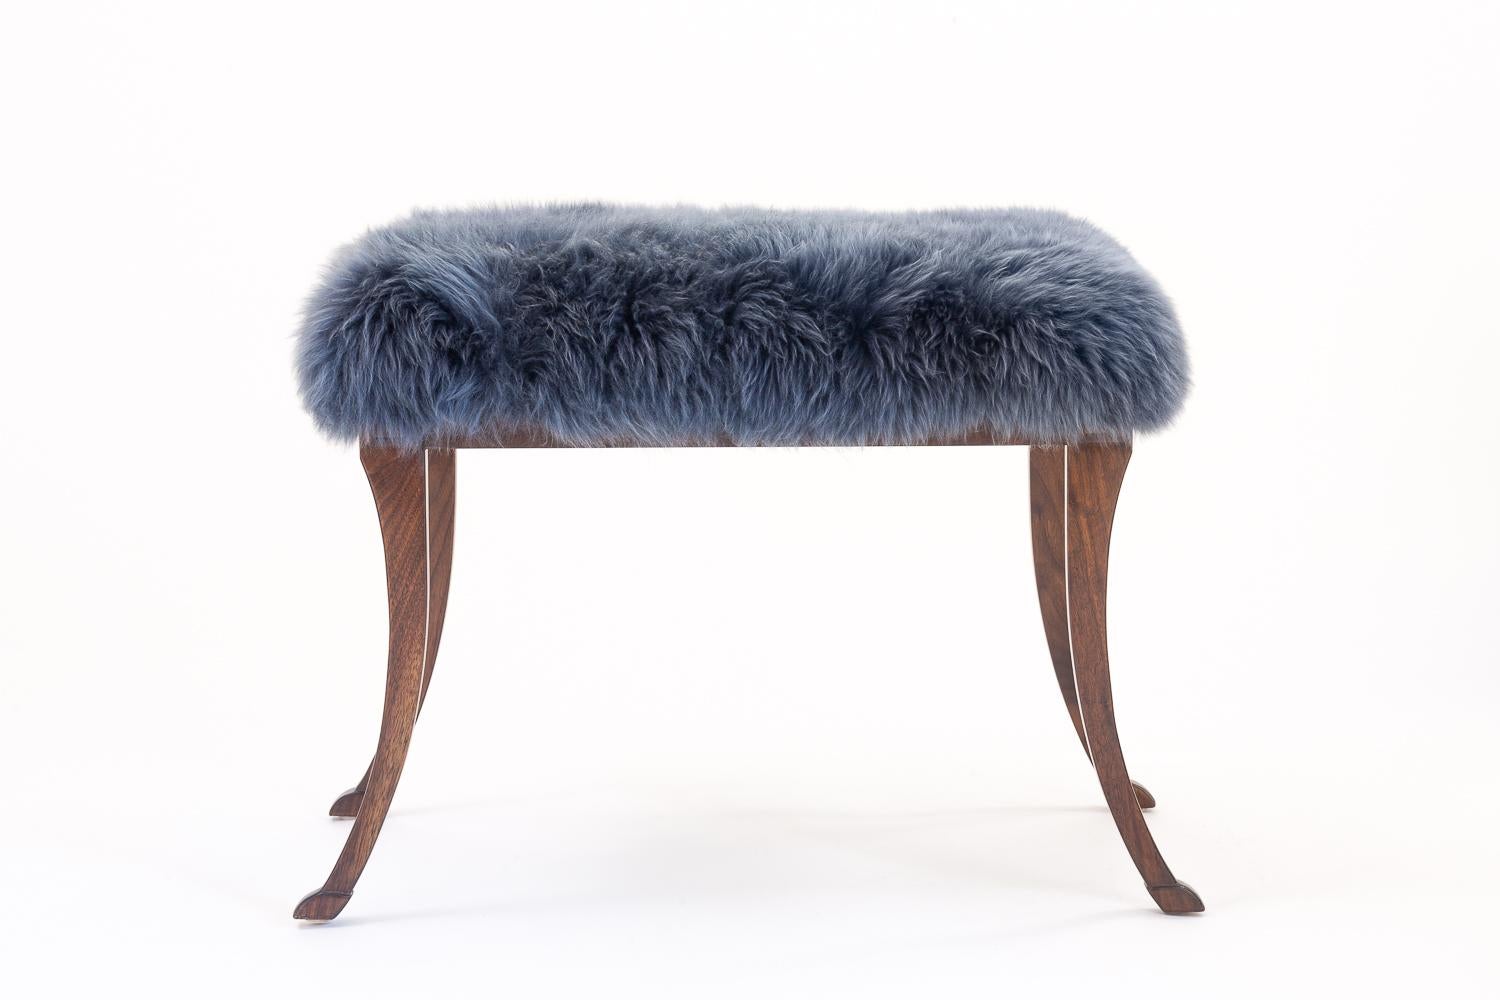 Reminiscent of the classical Greek period, the Eros bench features typical piano bench dimensions. It is crafted in solid walnut with traditional joinery, hand carved feet and escutcheons and upholstered in black, white or gray Mongolian fur. Each